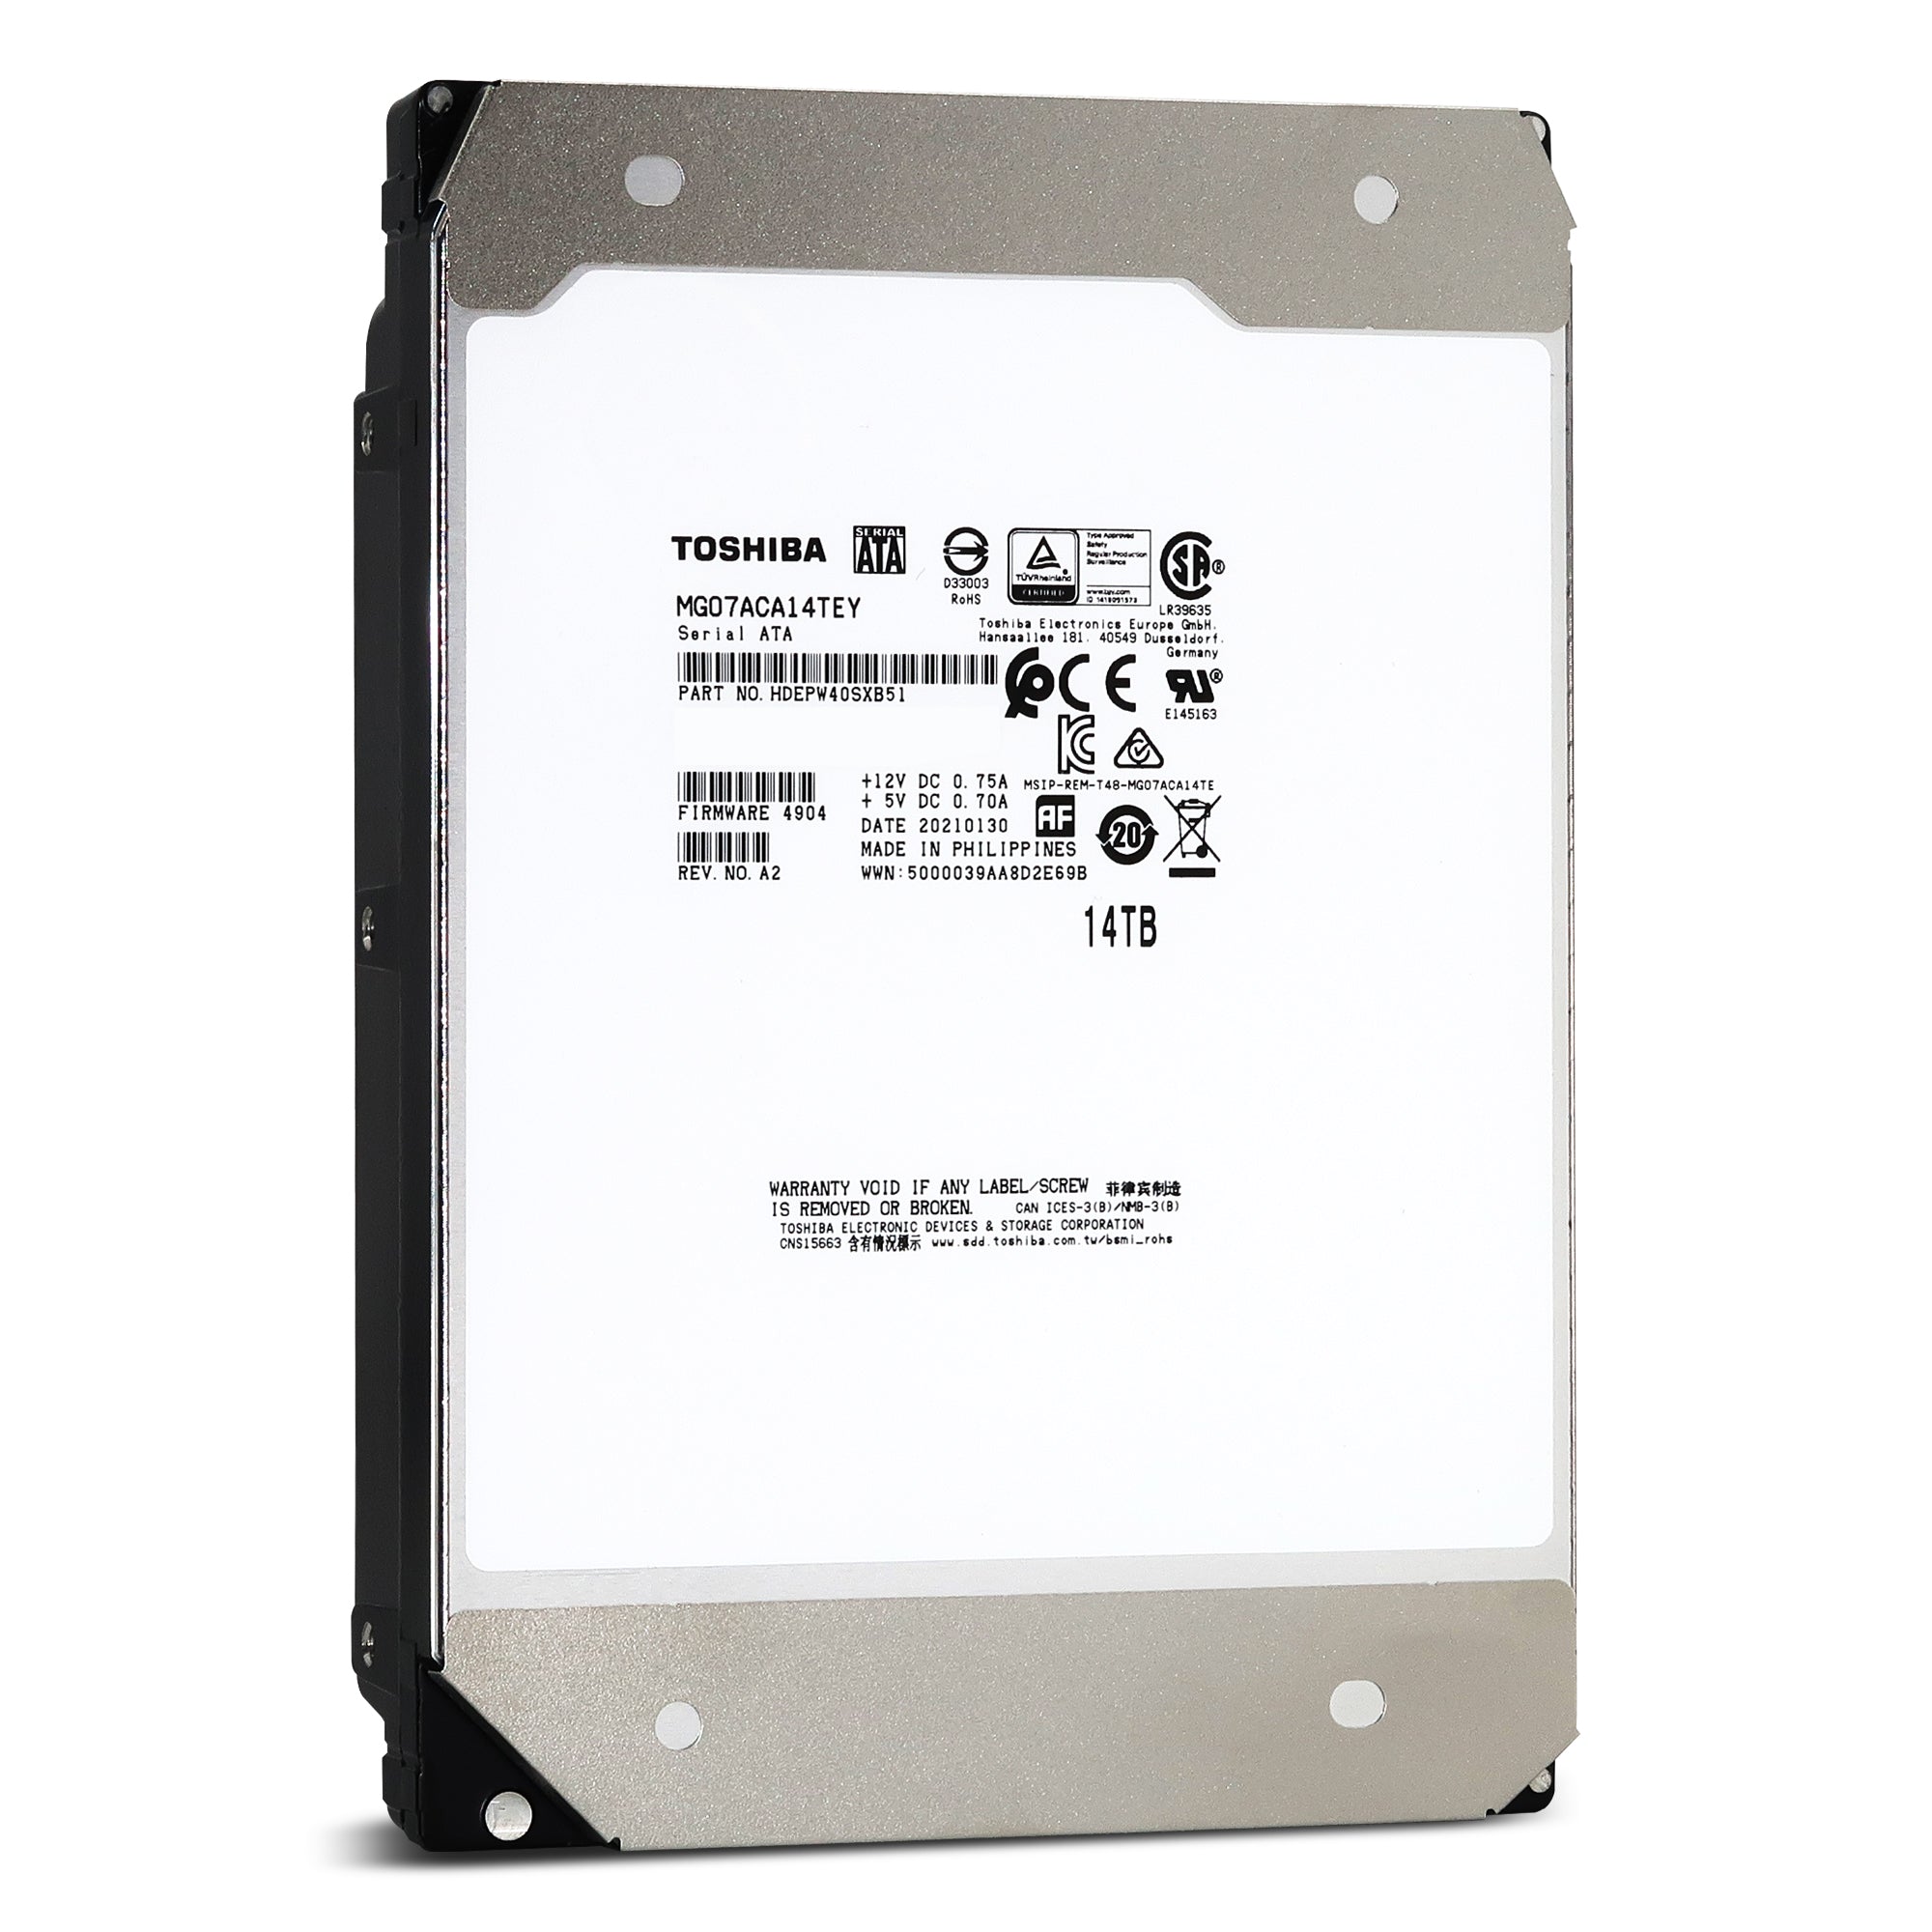 Toshiba MG07 MG07ACA14TEY 14TB 7.2K RPM SATA 6Gb/s 512e SIE 3.5in Hard Drive - Front View